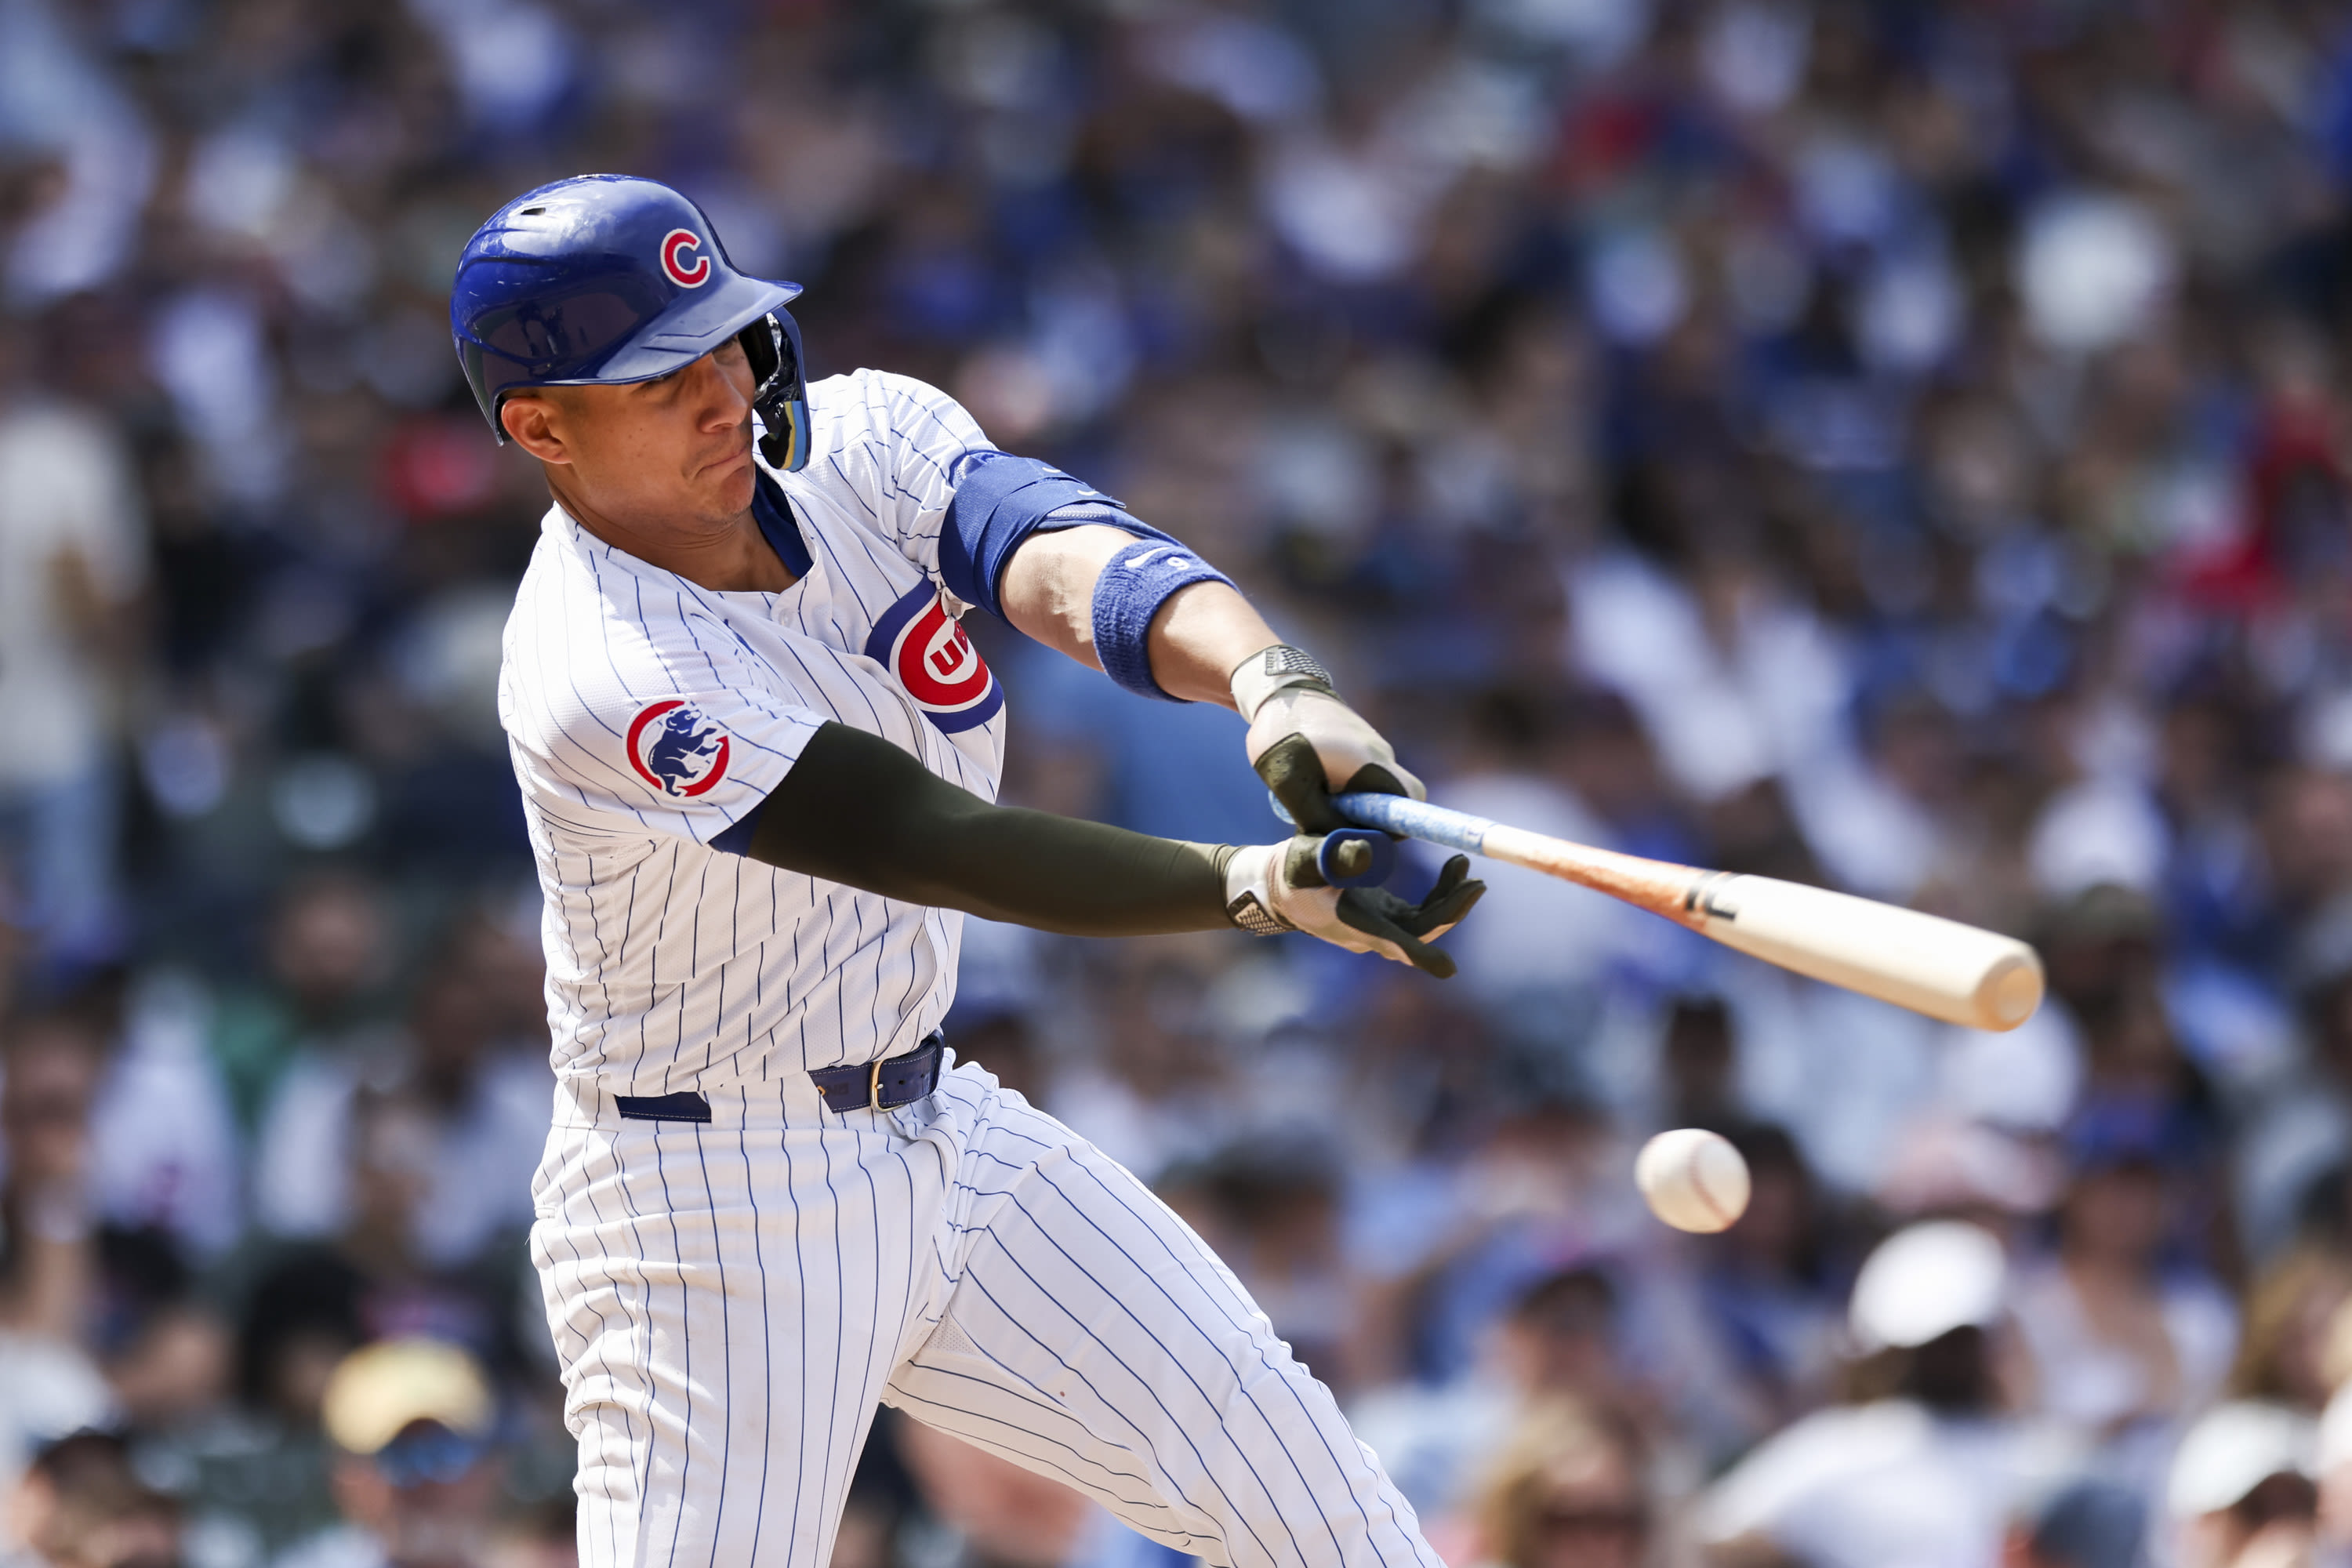 As Chicago Cubs’ struggles continue, a look at 3 players who need to step up to avoid another bad June